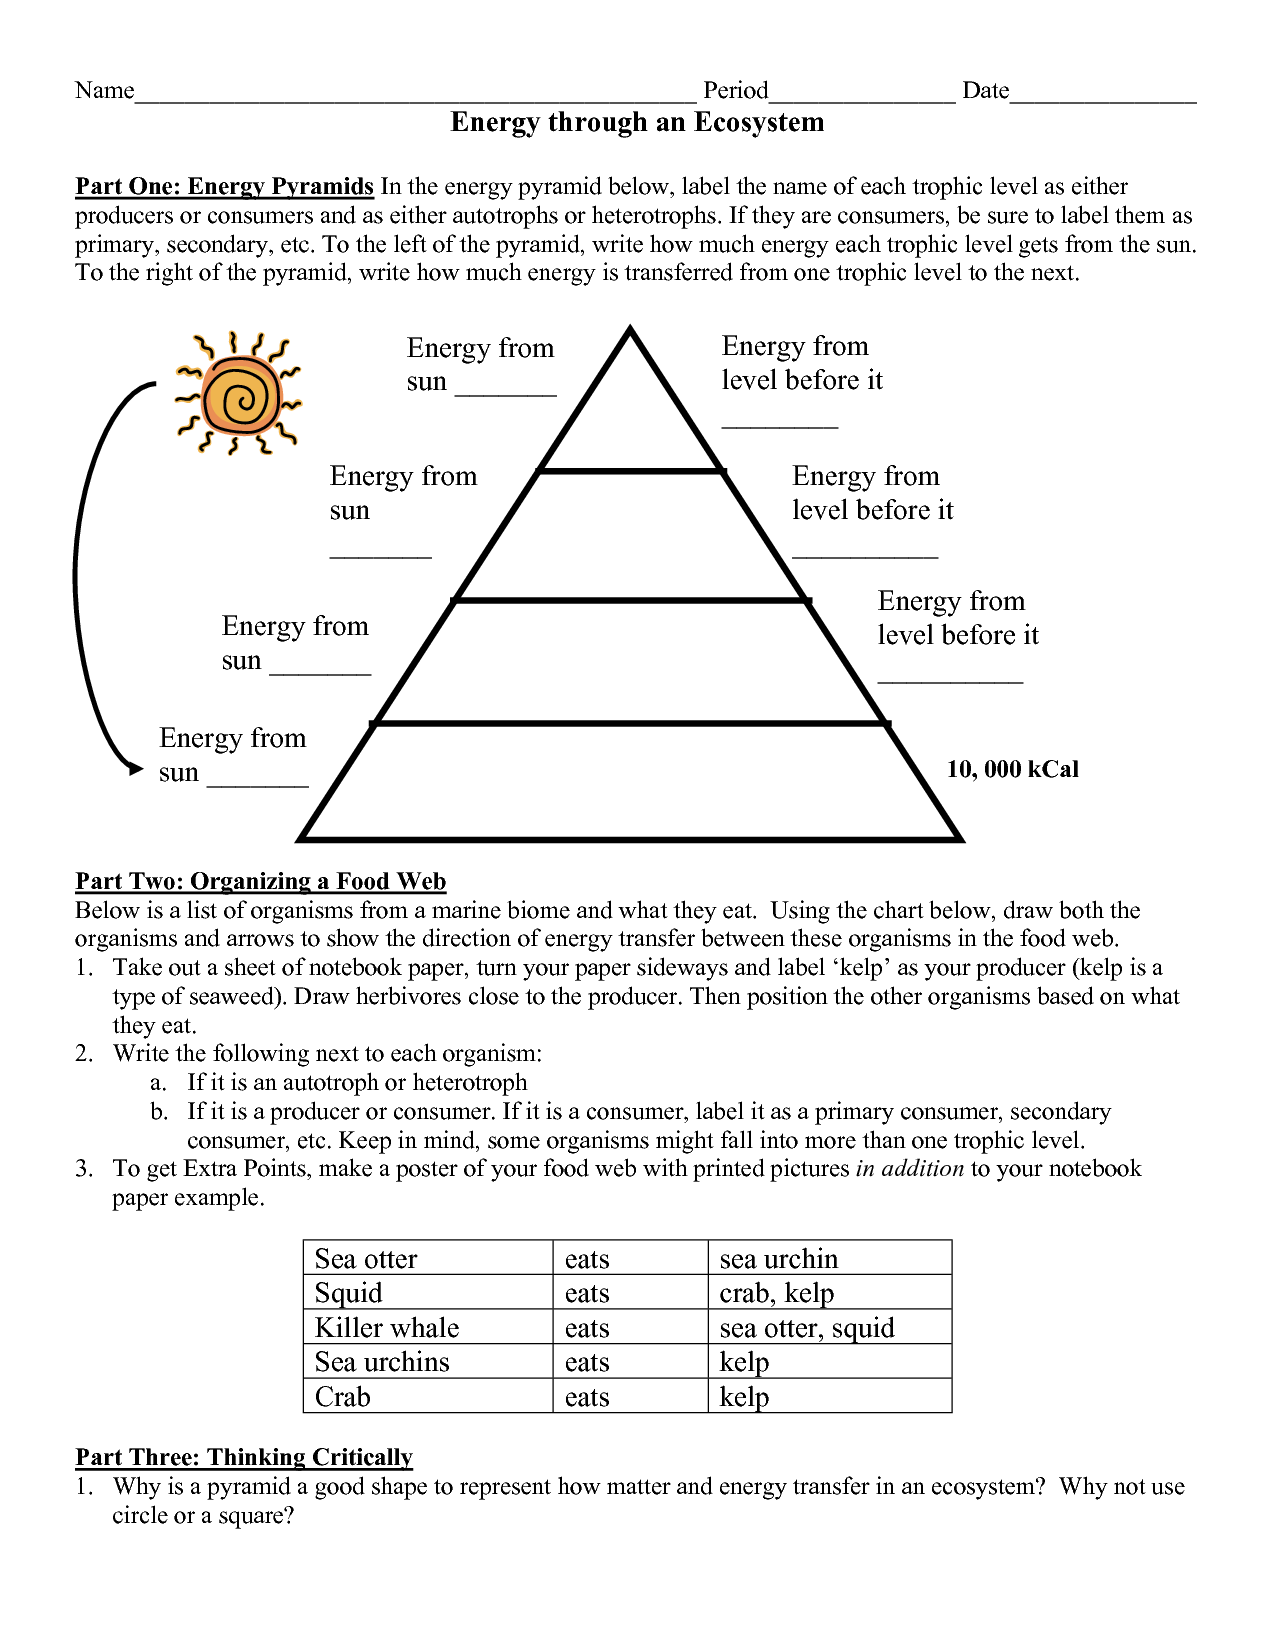 Energy Flow In Ecosystems Worksheet Answers - Nidecmege Inside Energy Flow In Ecosystems Worksheet